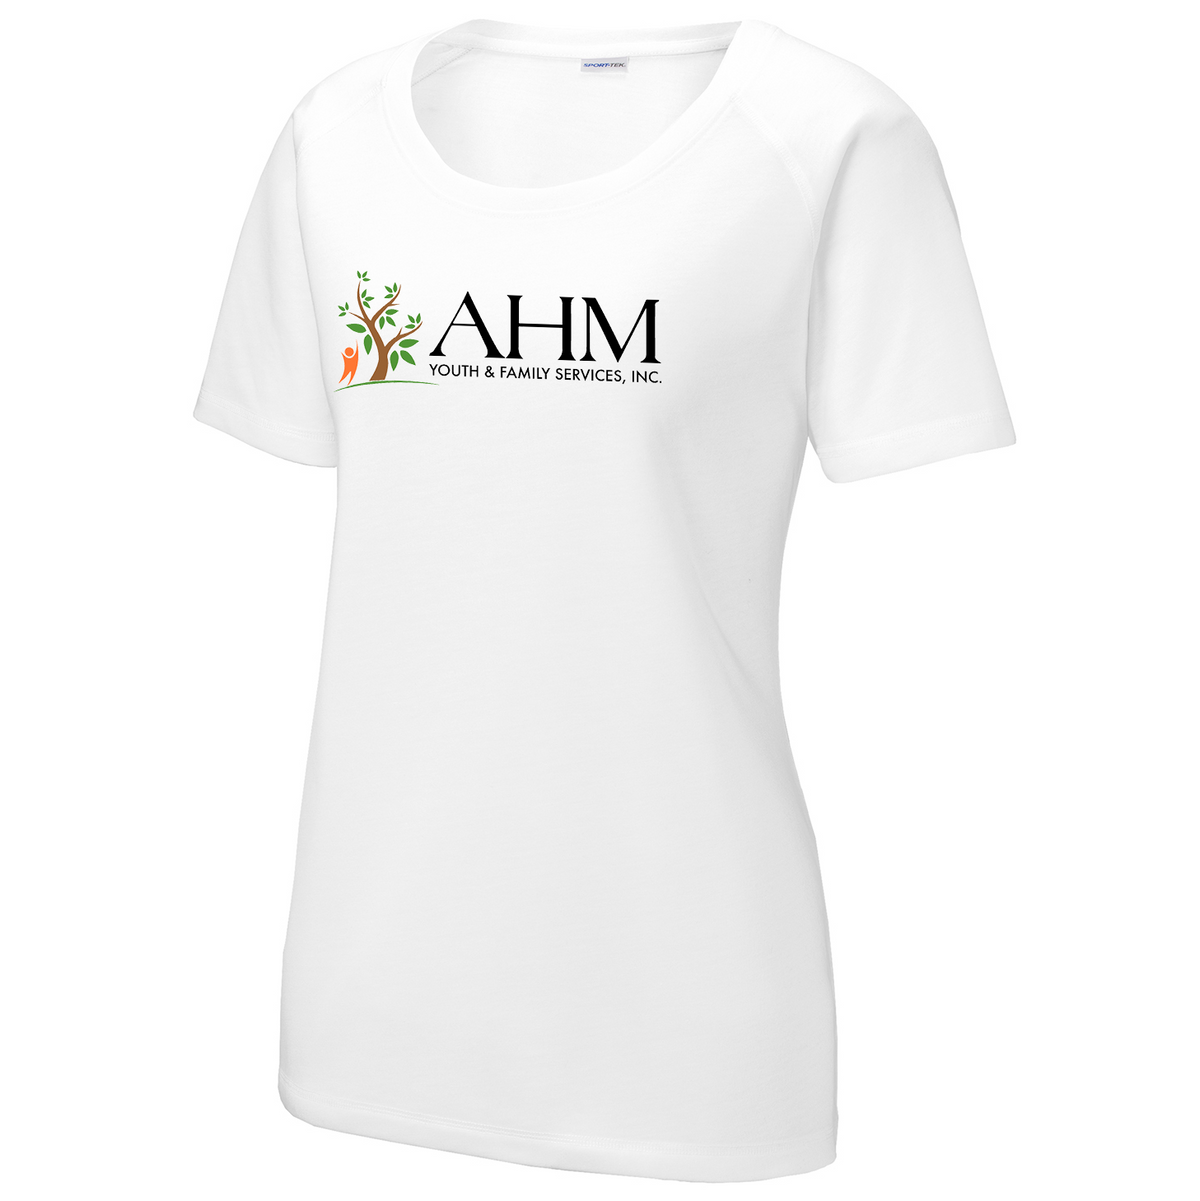 AHM Youth & Family Services Women's Raglan CottonTouch